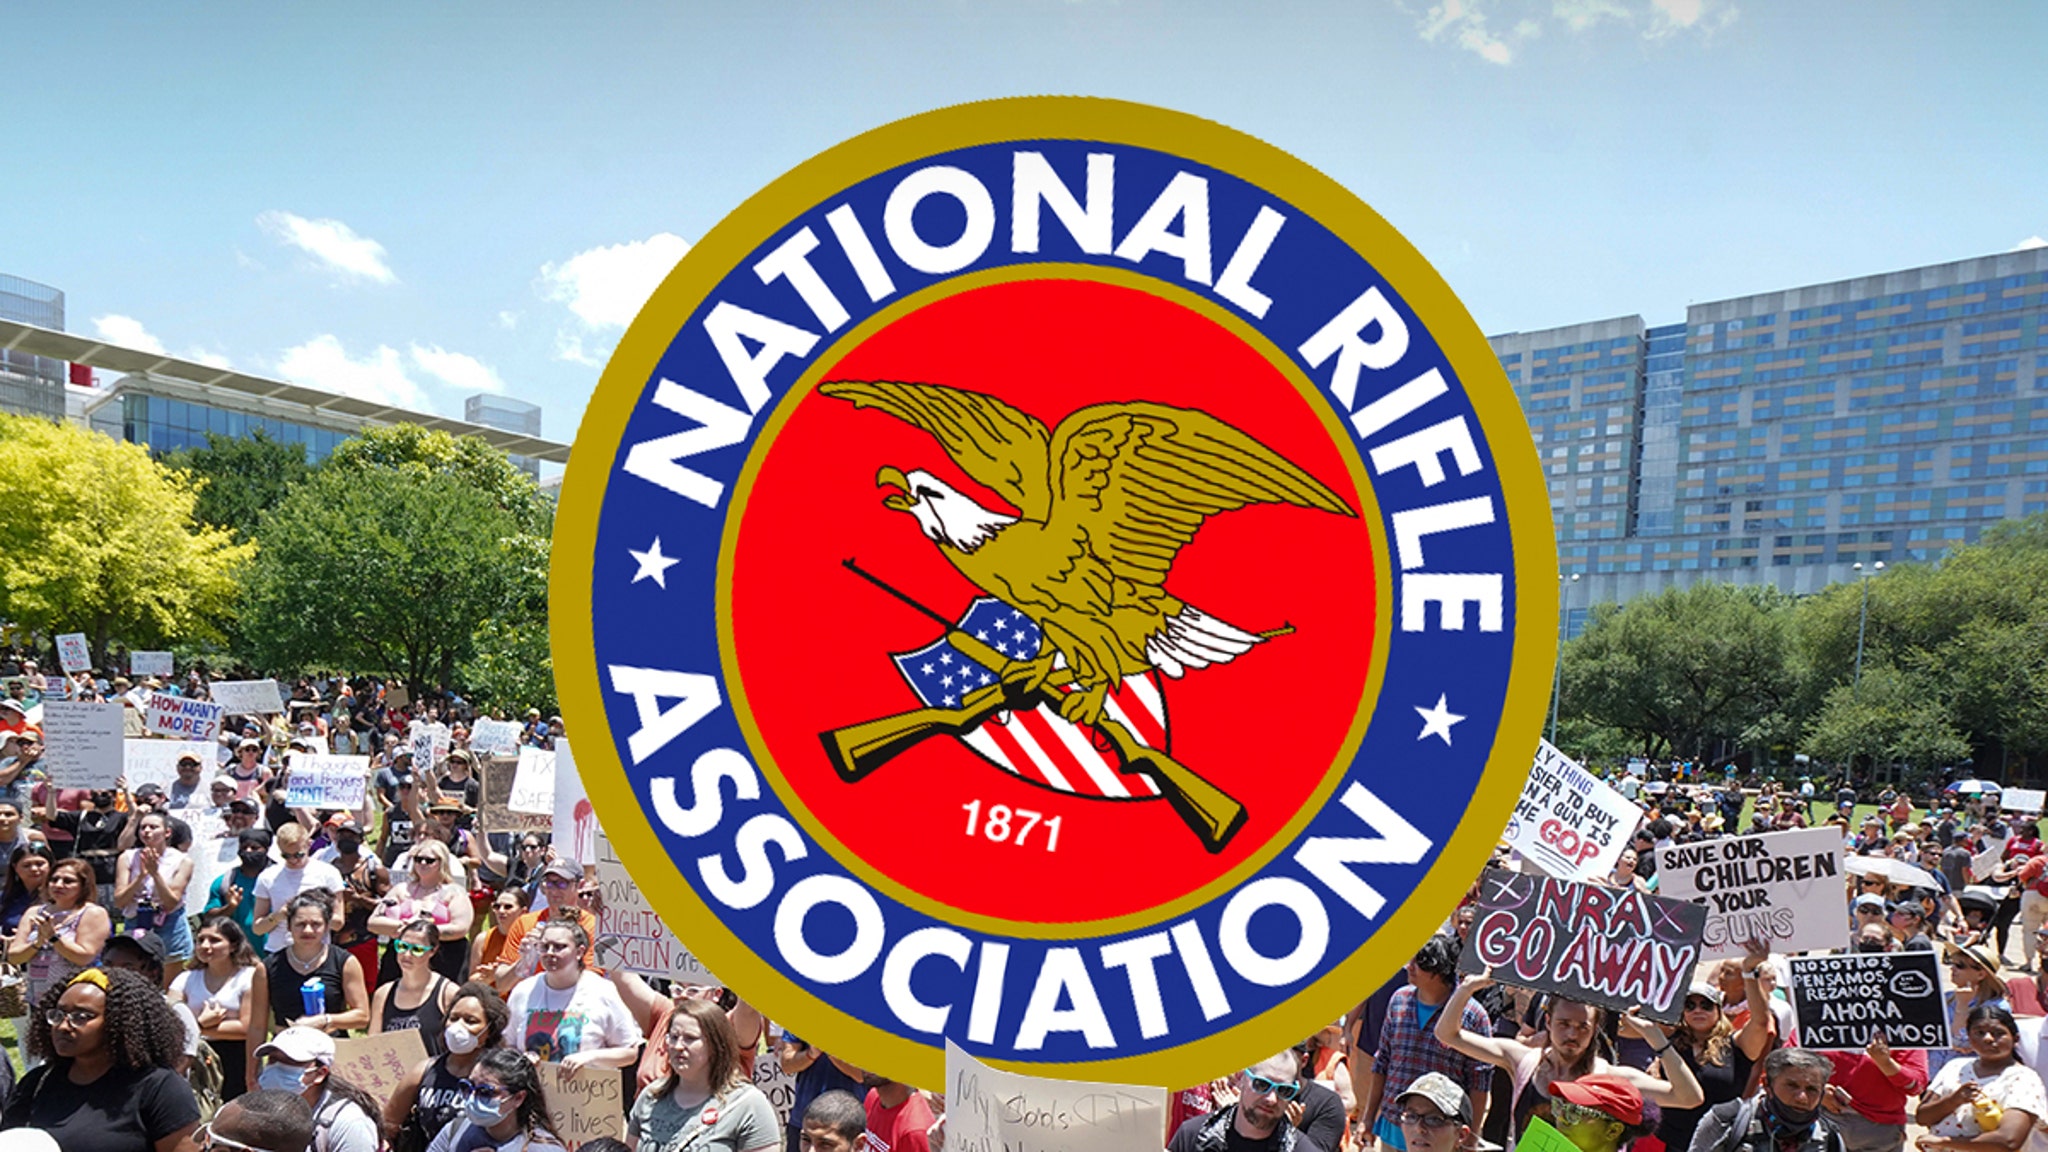 NRA Benefit Concert Canceled After Performers Pull Out Over School Shooting